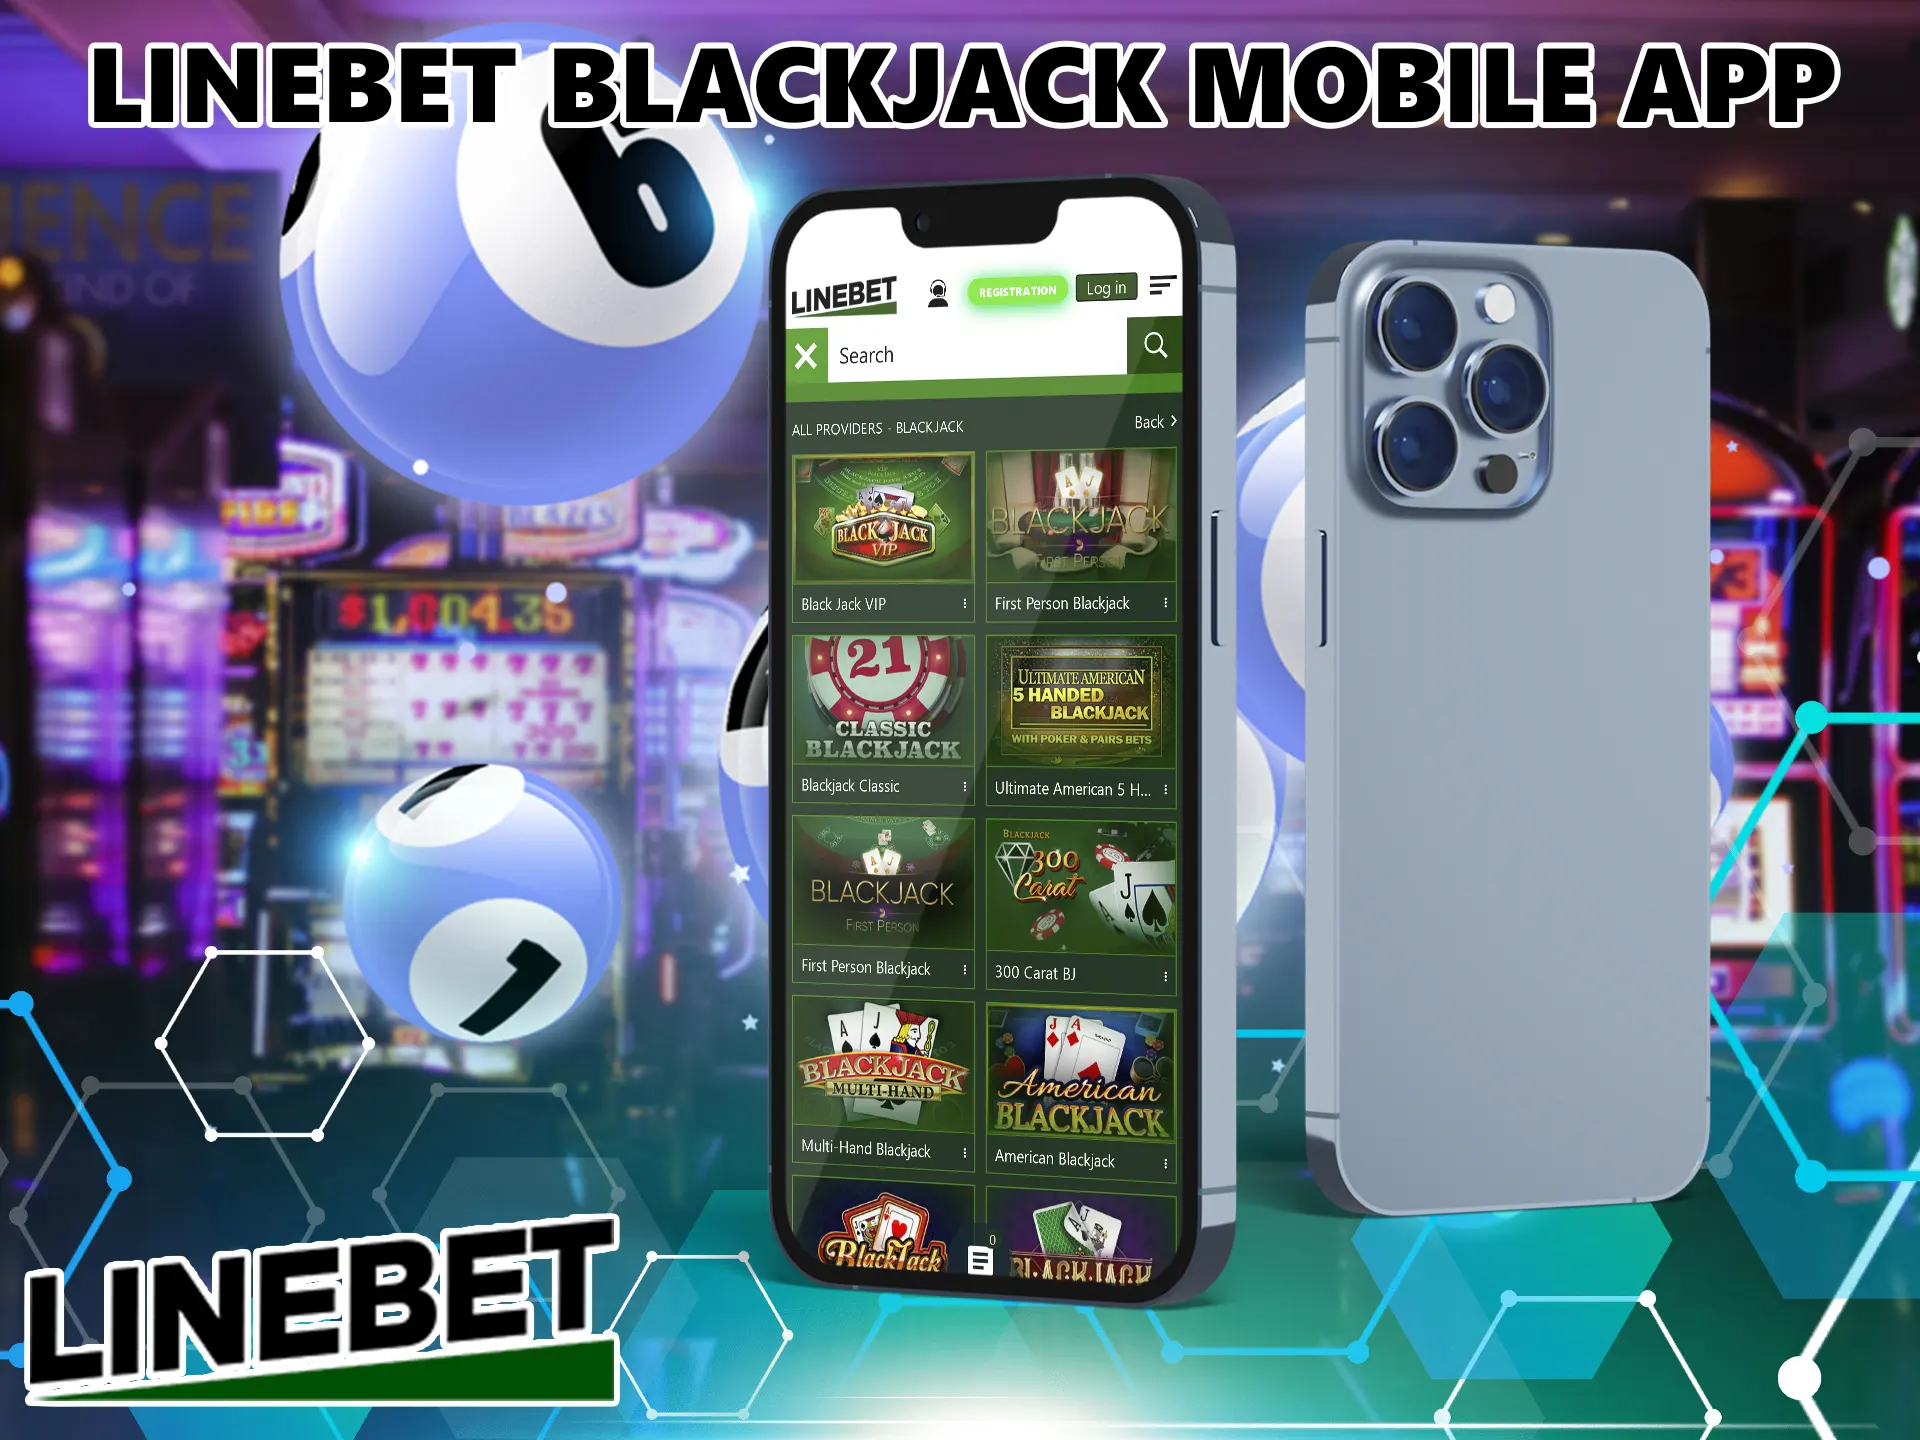 Any user from India can place bets from any convenient location and at any time by simply installing the Linebet software on their smartphone.